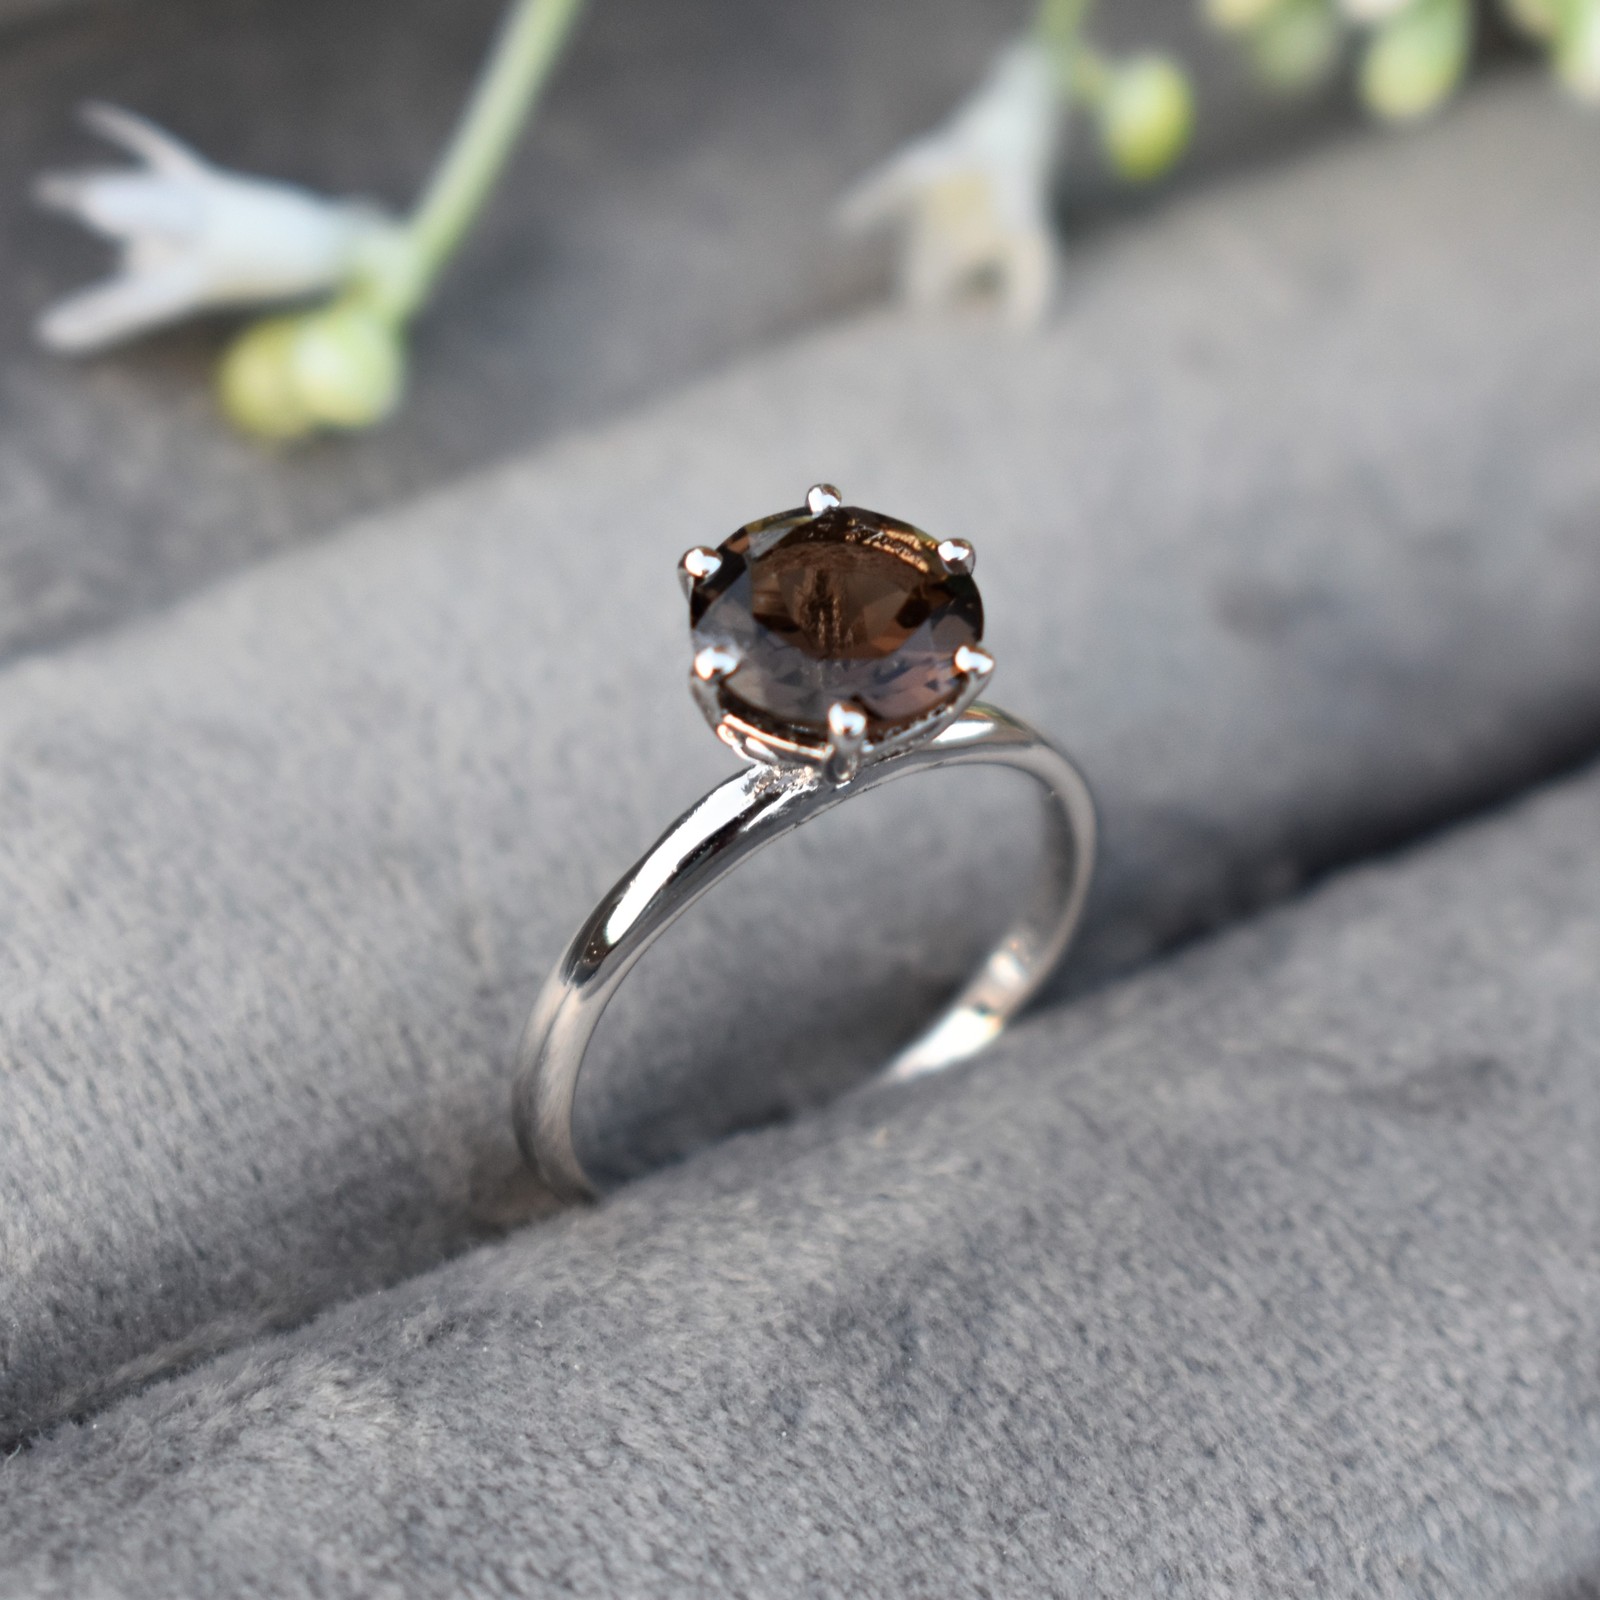 Primary image for Smoky Quartz Ring / 925 Sterling Silver Ring / Statement Ring / Cocktail Ring